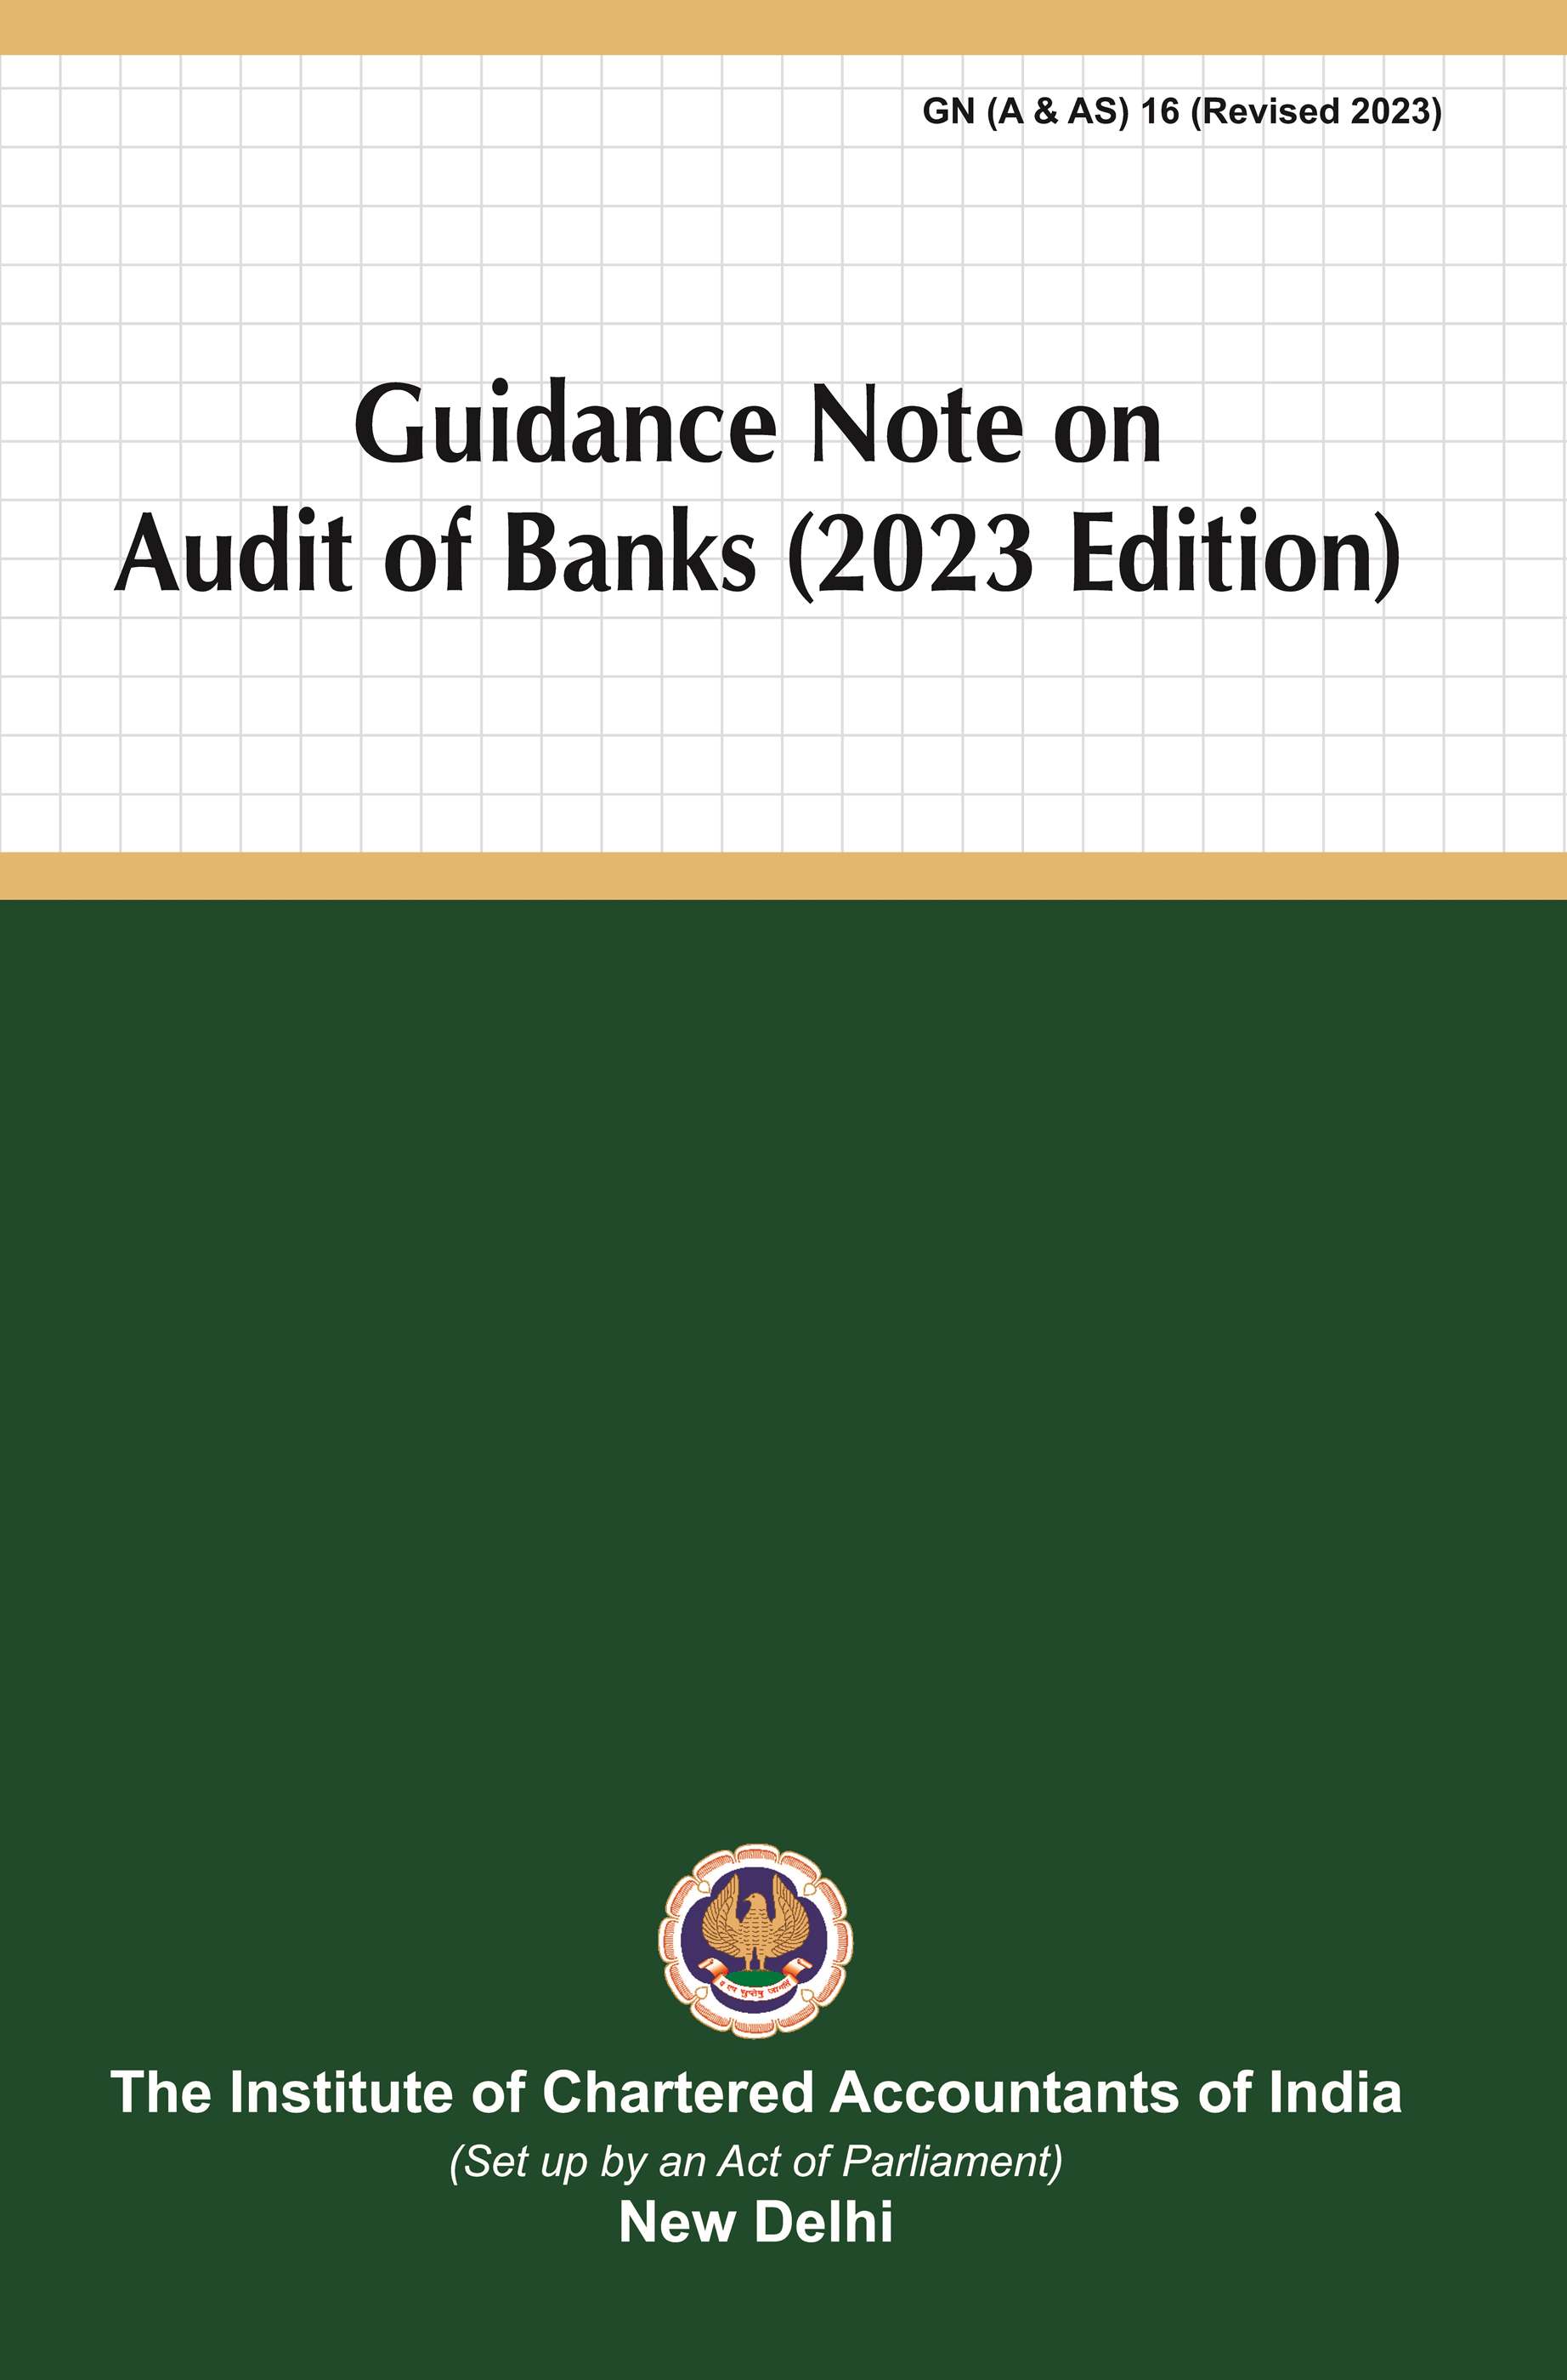 Guidance Note on Audit of Banks (2023 Edition)